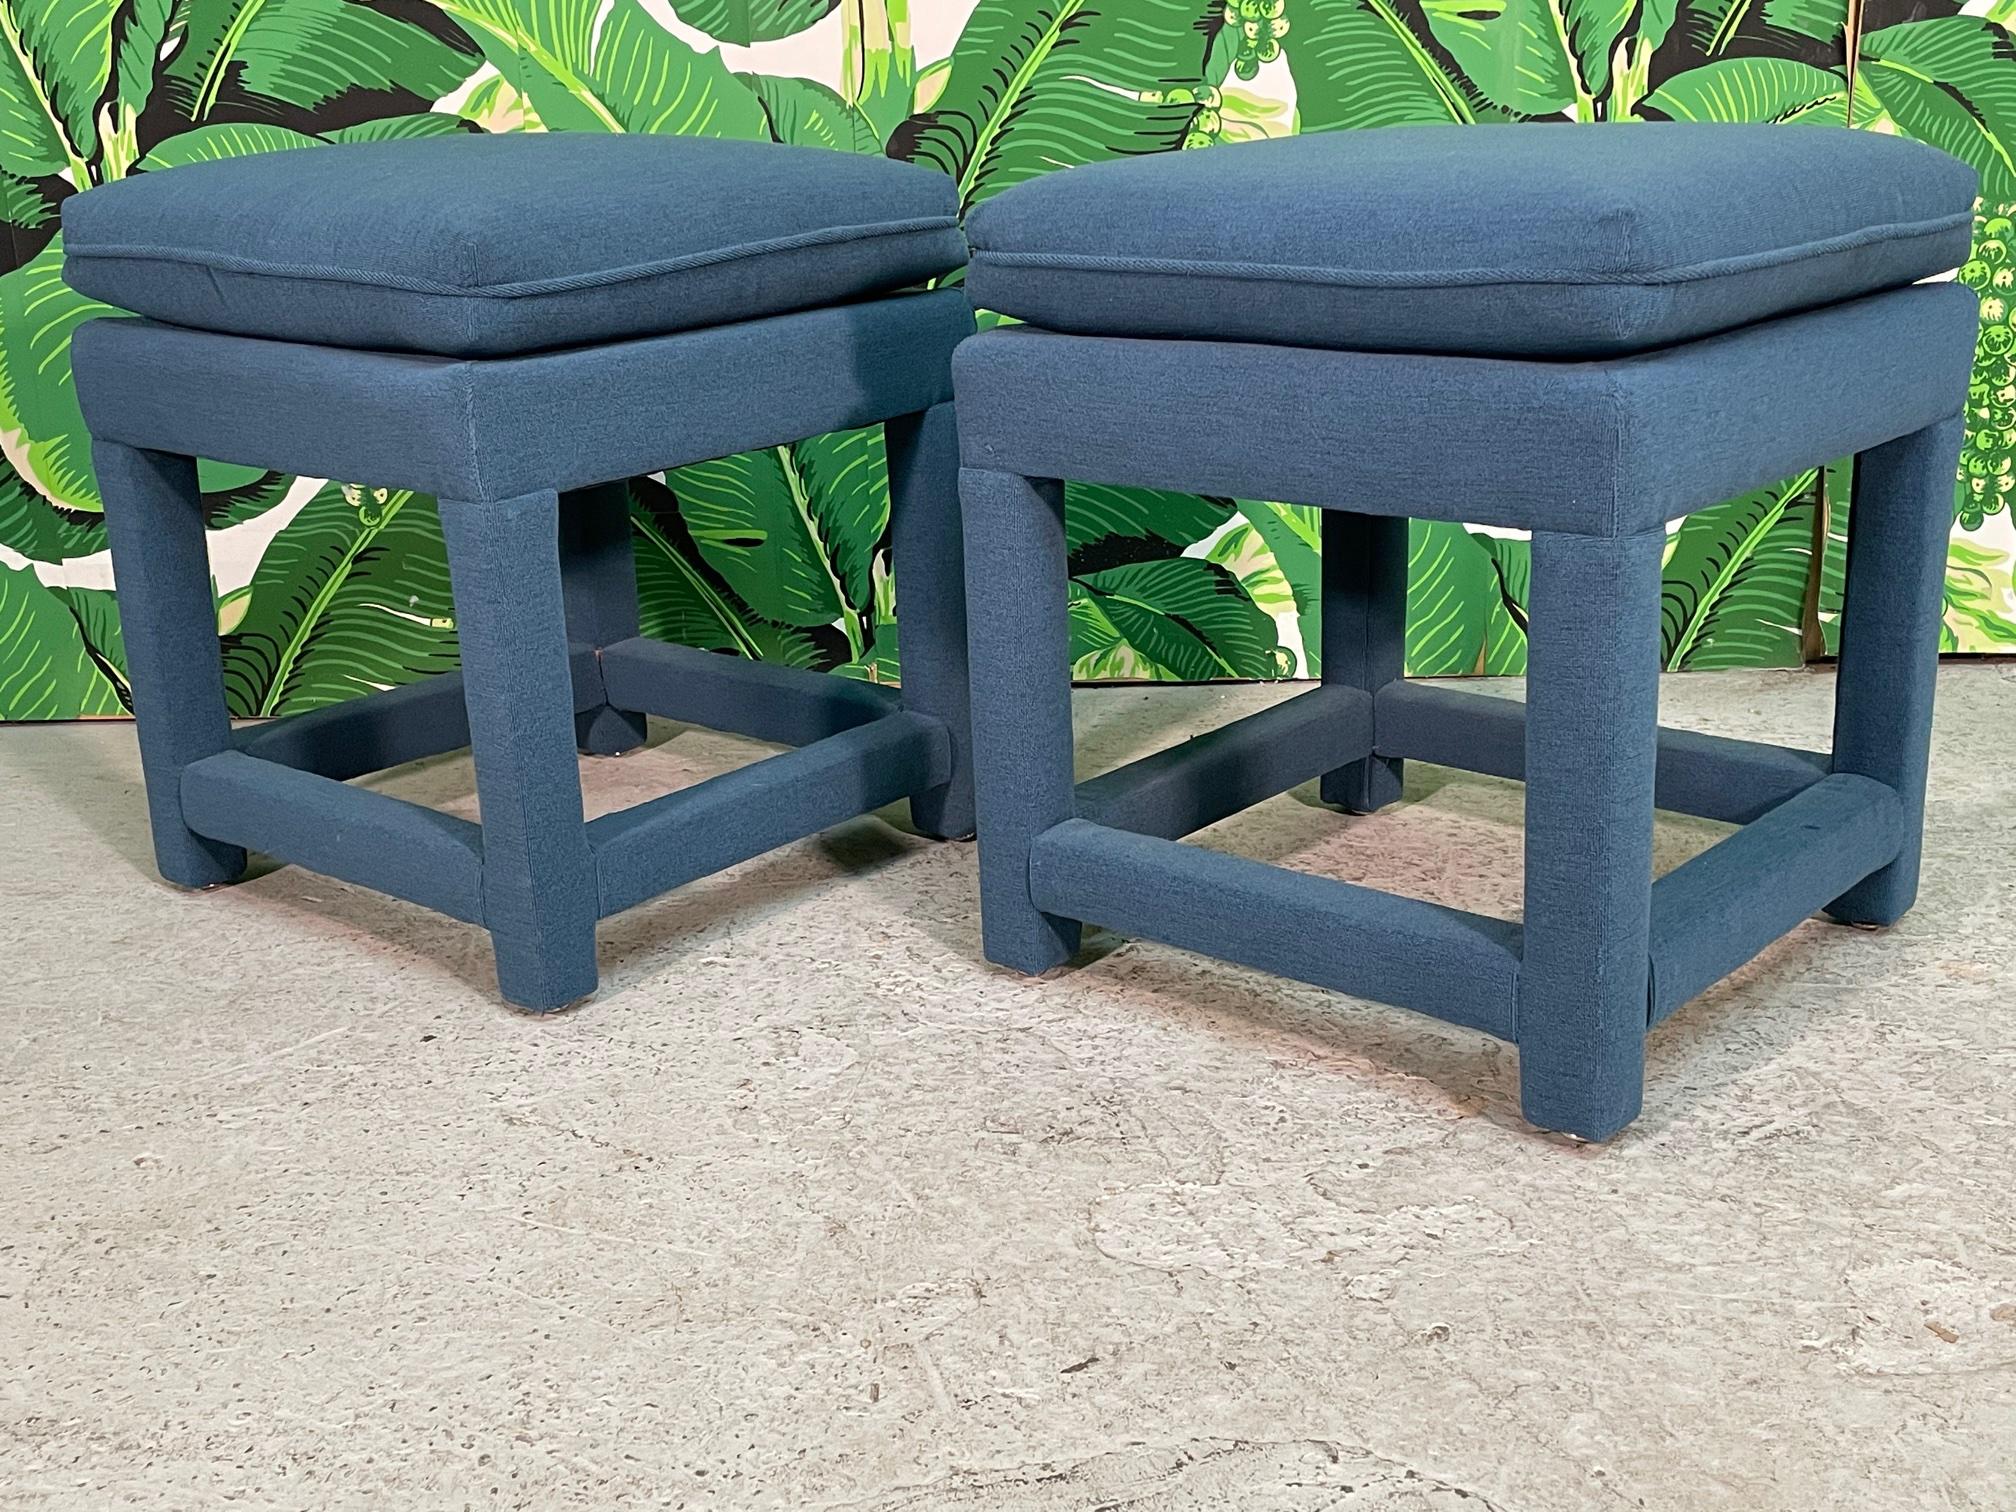 Pair of midcentury fully upholstered foot stools. Could be used as an ottoman. Very good condition with no noticeable wear. 

